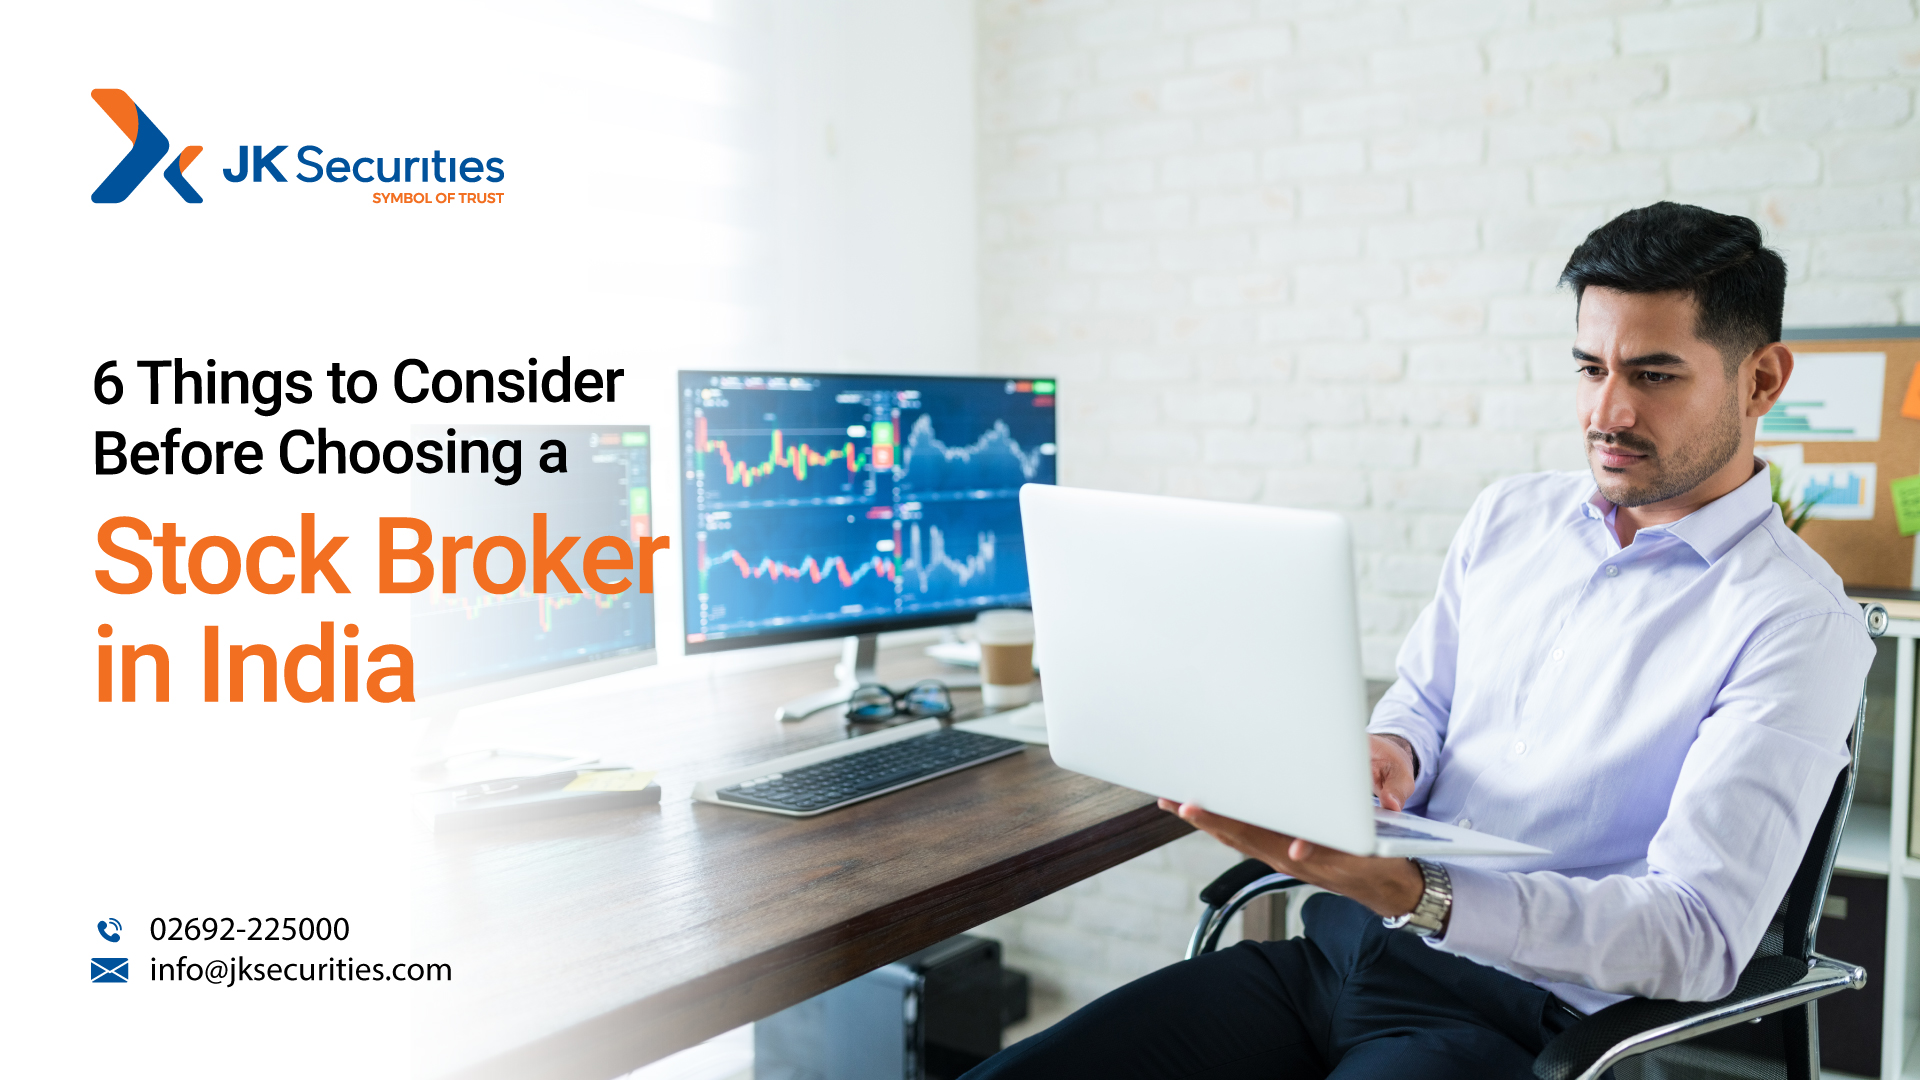 6 Things to Consider Before Choosing a Stock Broker in India